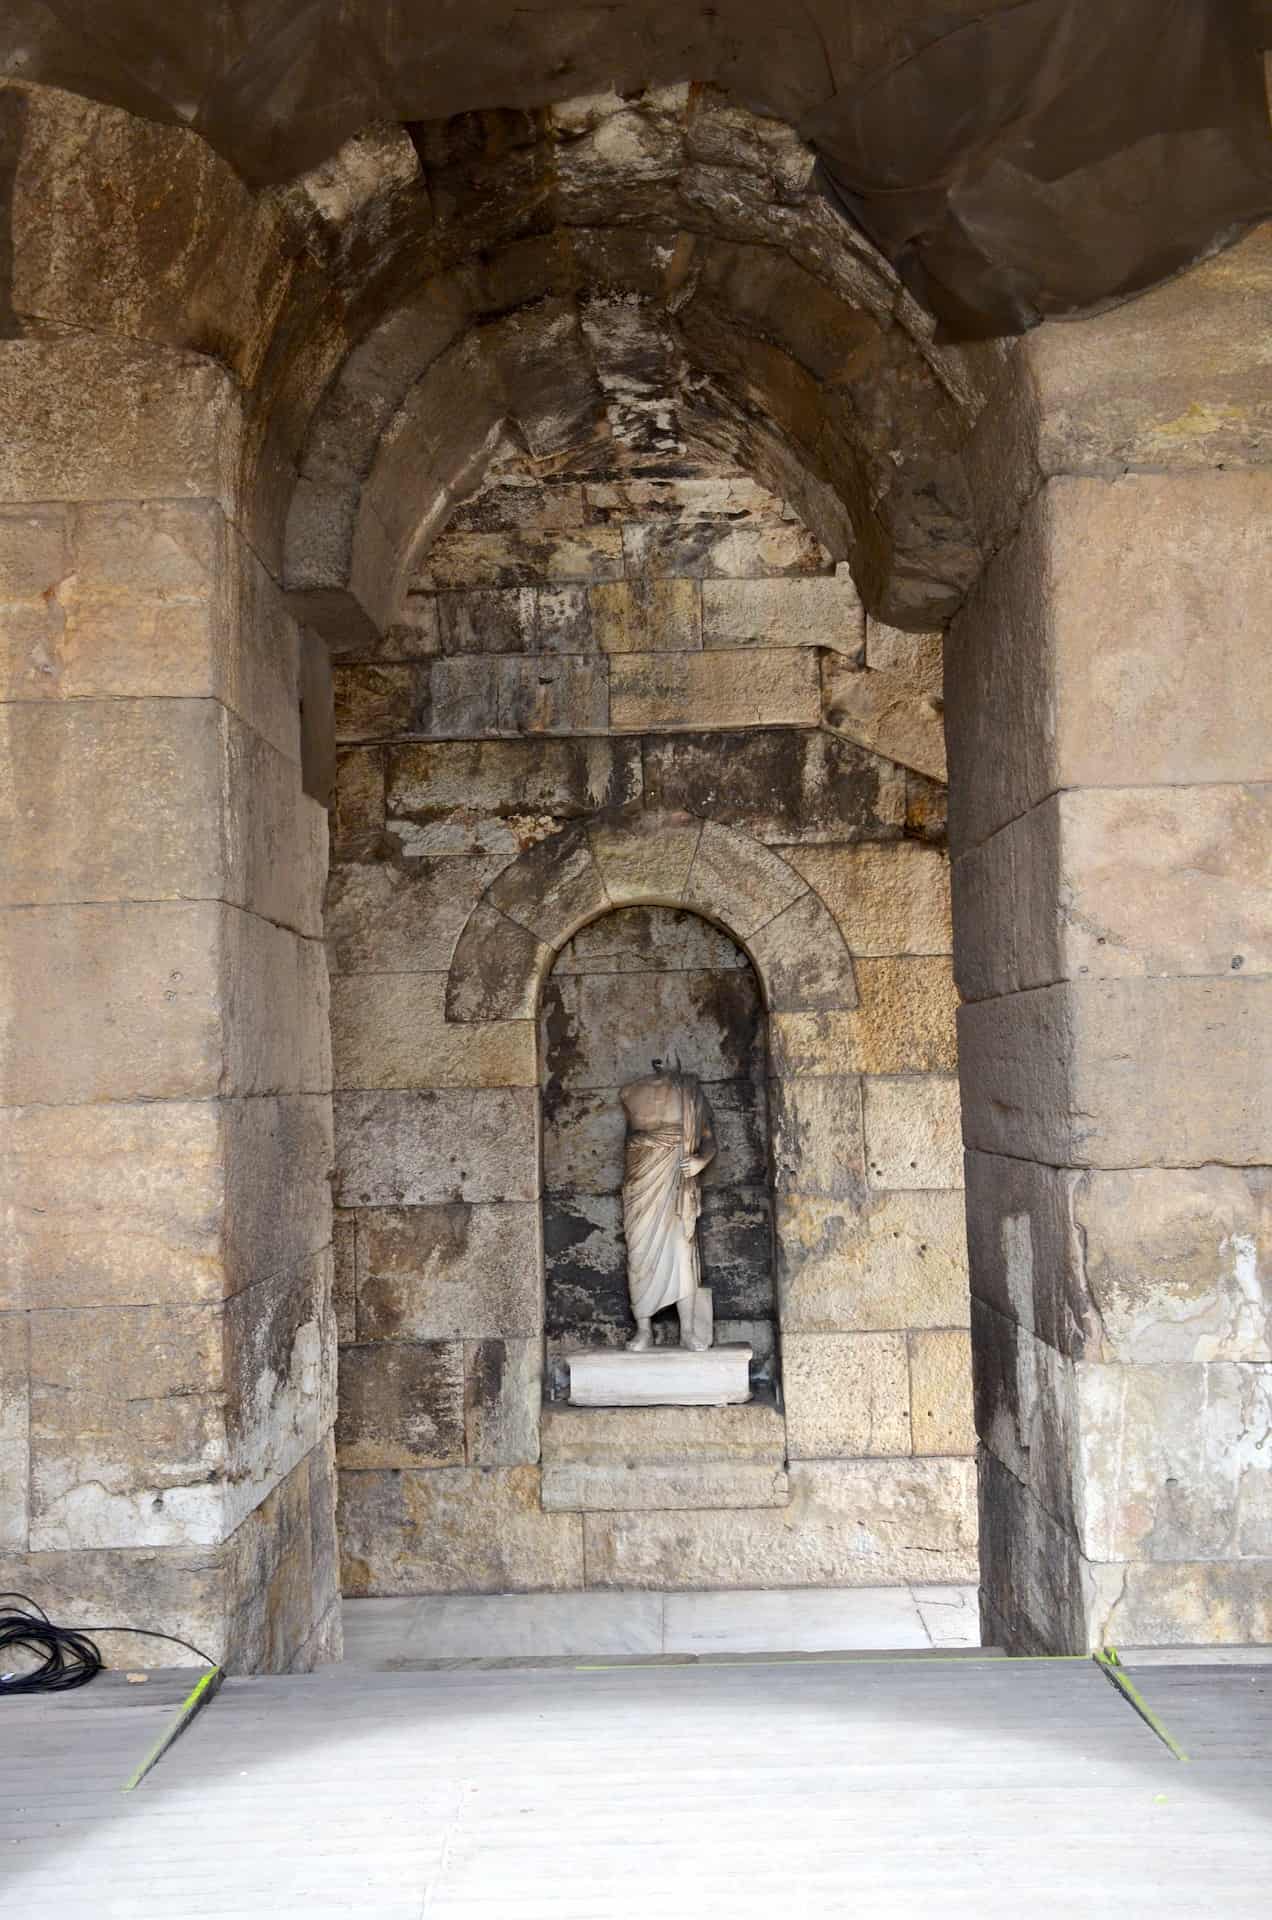 West niche of the Odeon of Herodes Atticus